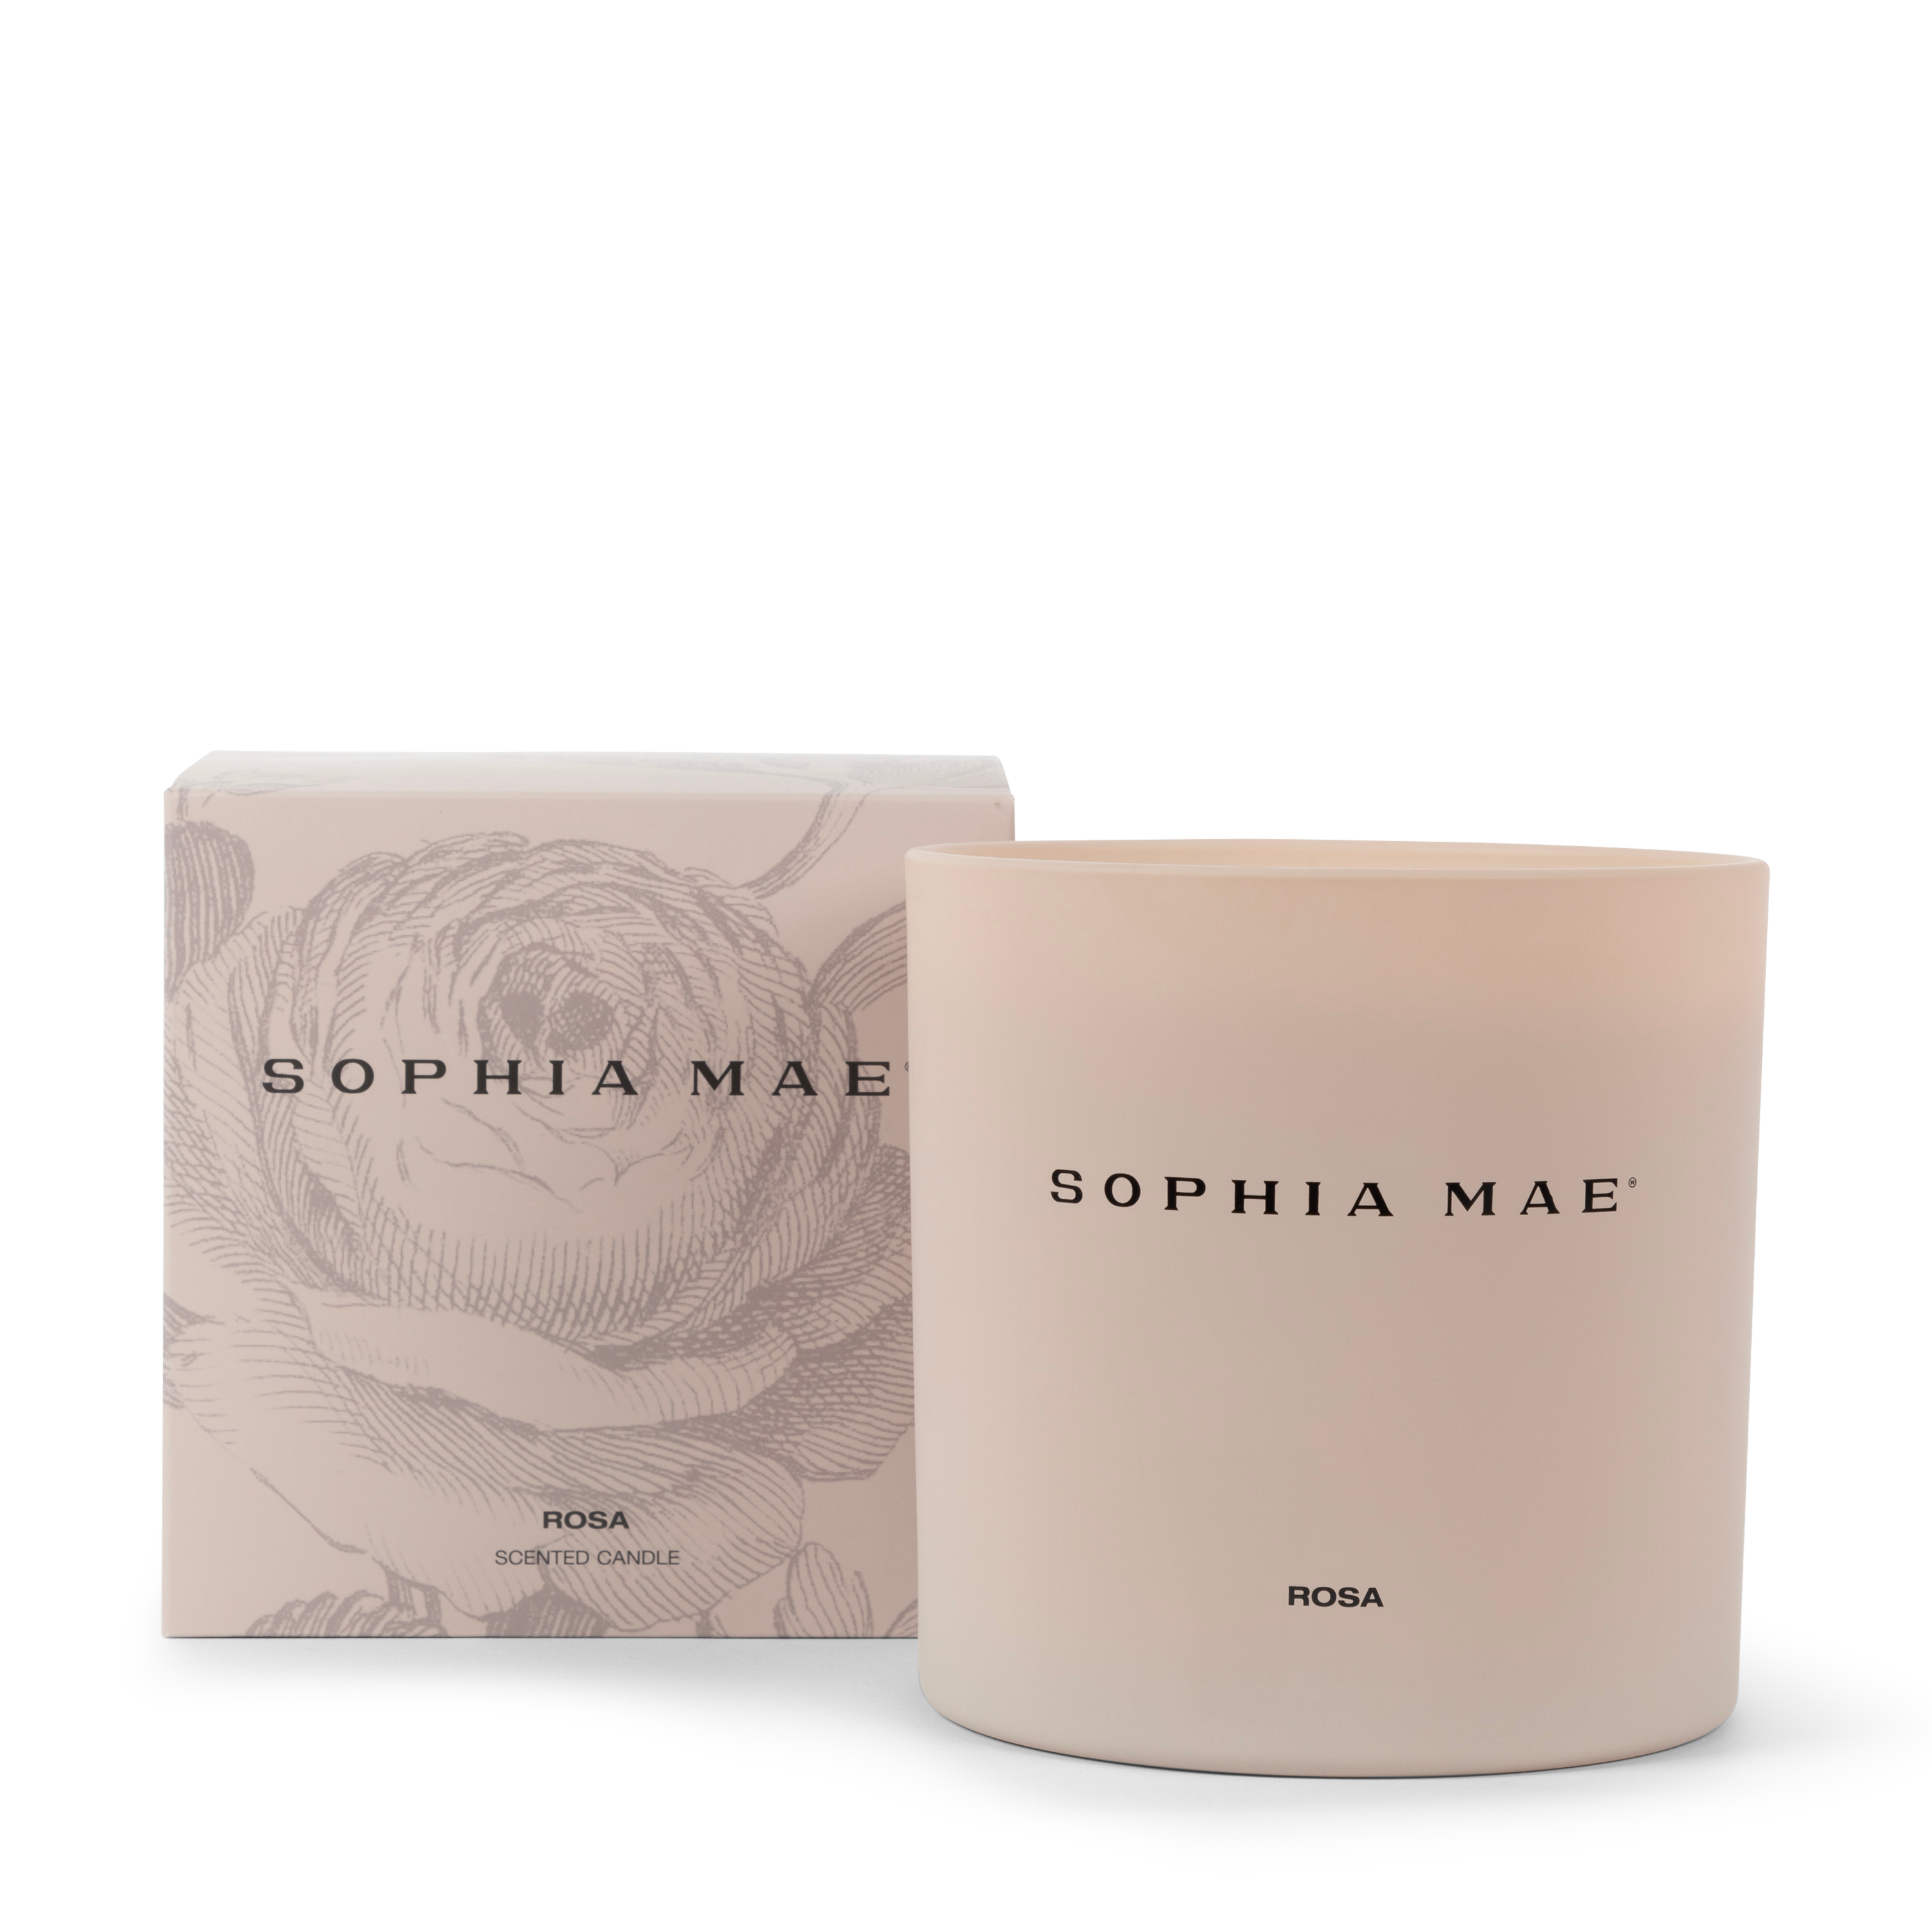 ROSA SCENTED CANDLE MAXI | SOPHIA MAE by Monica Geuze